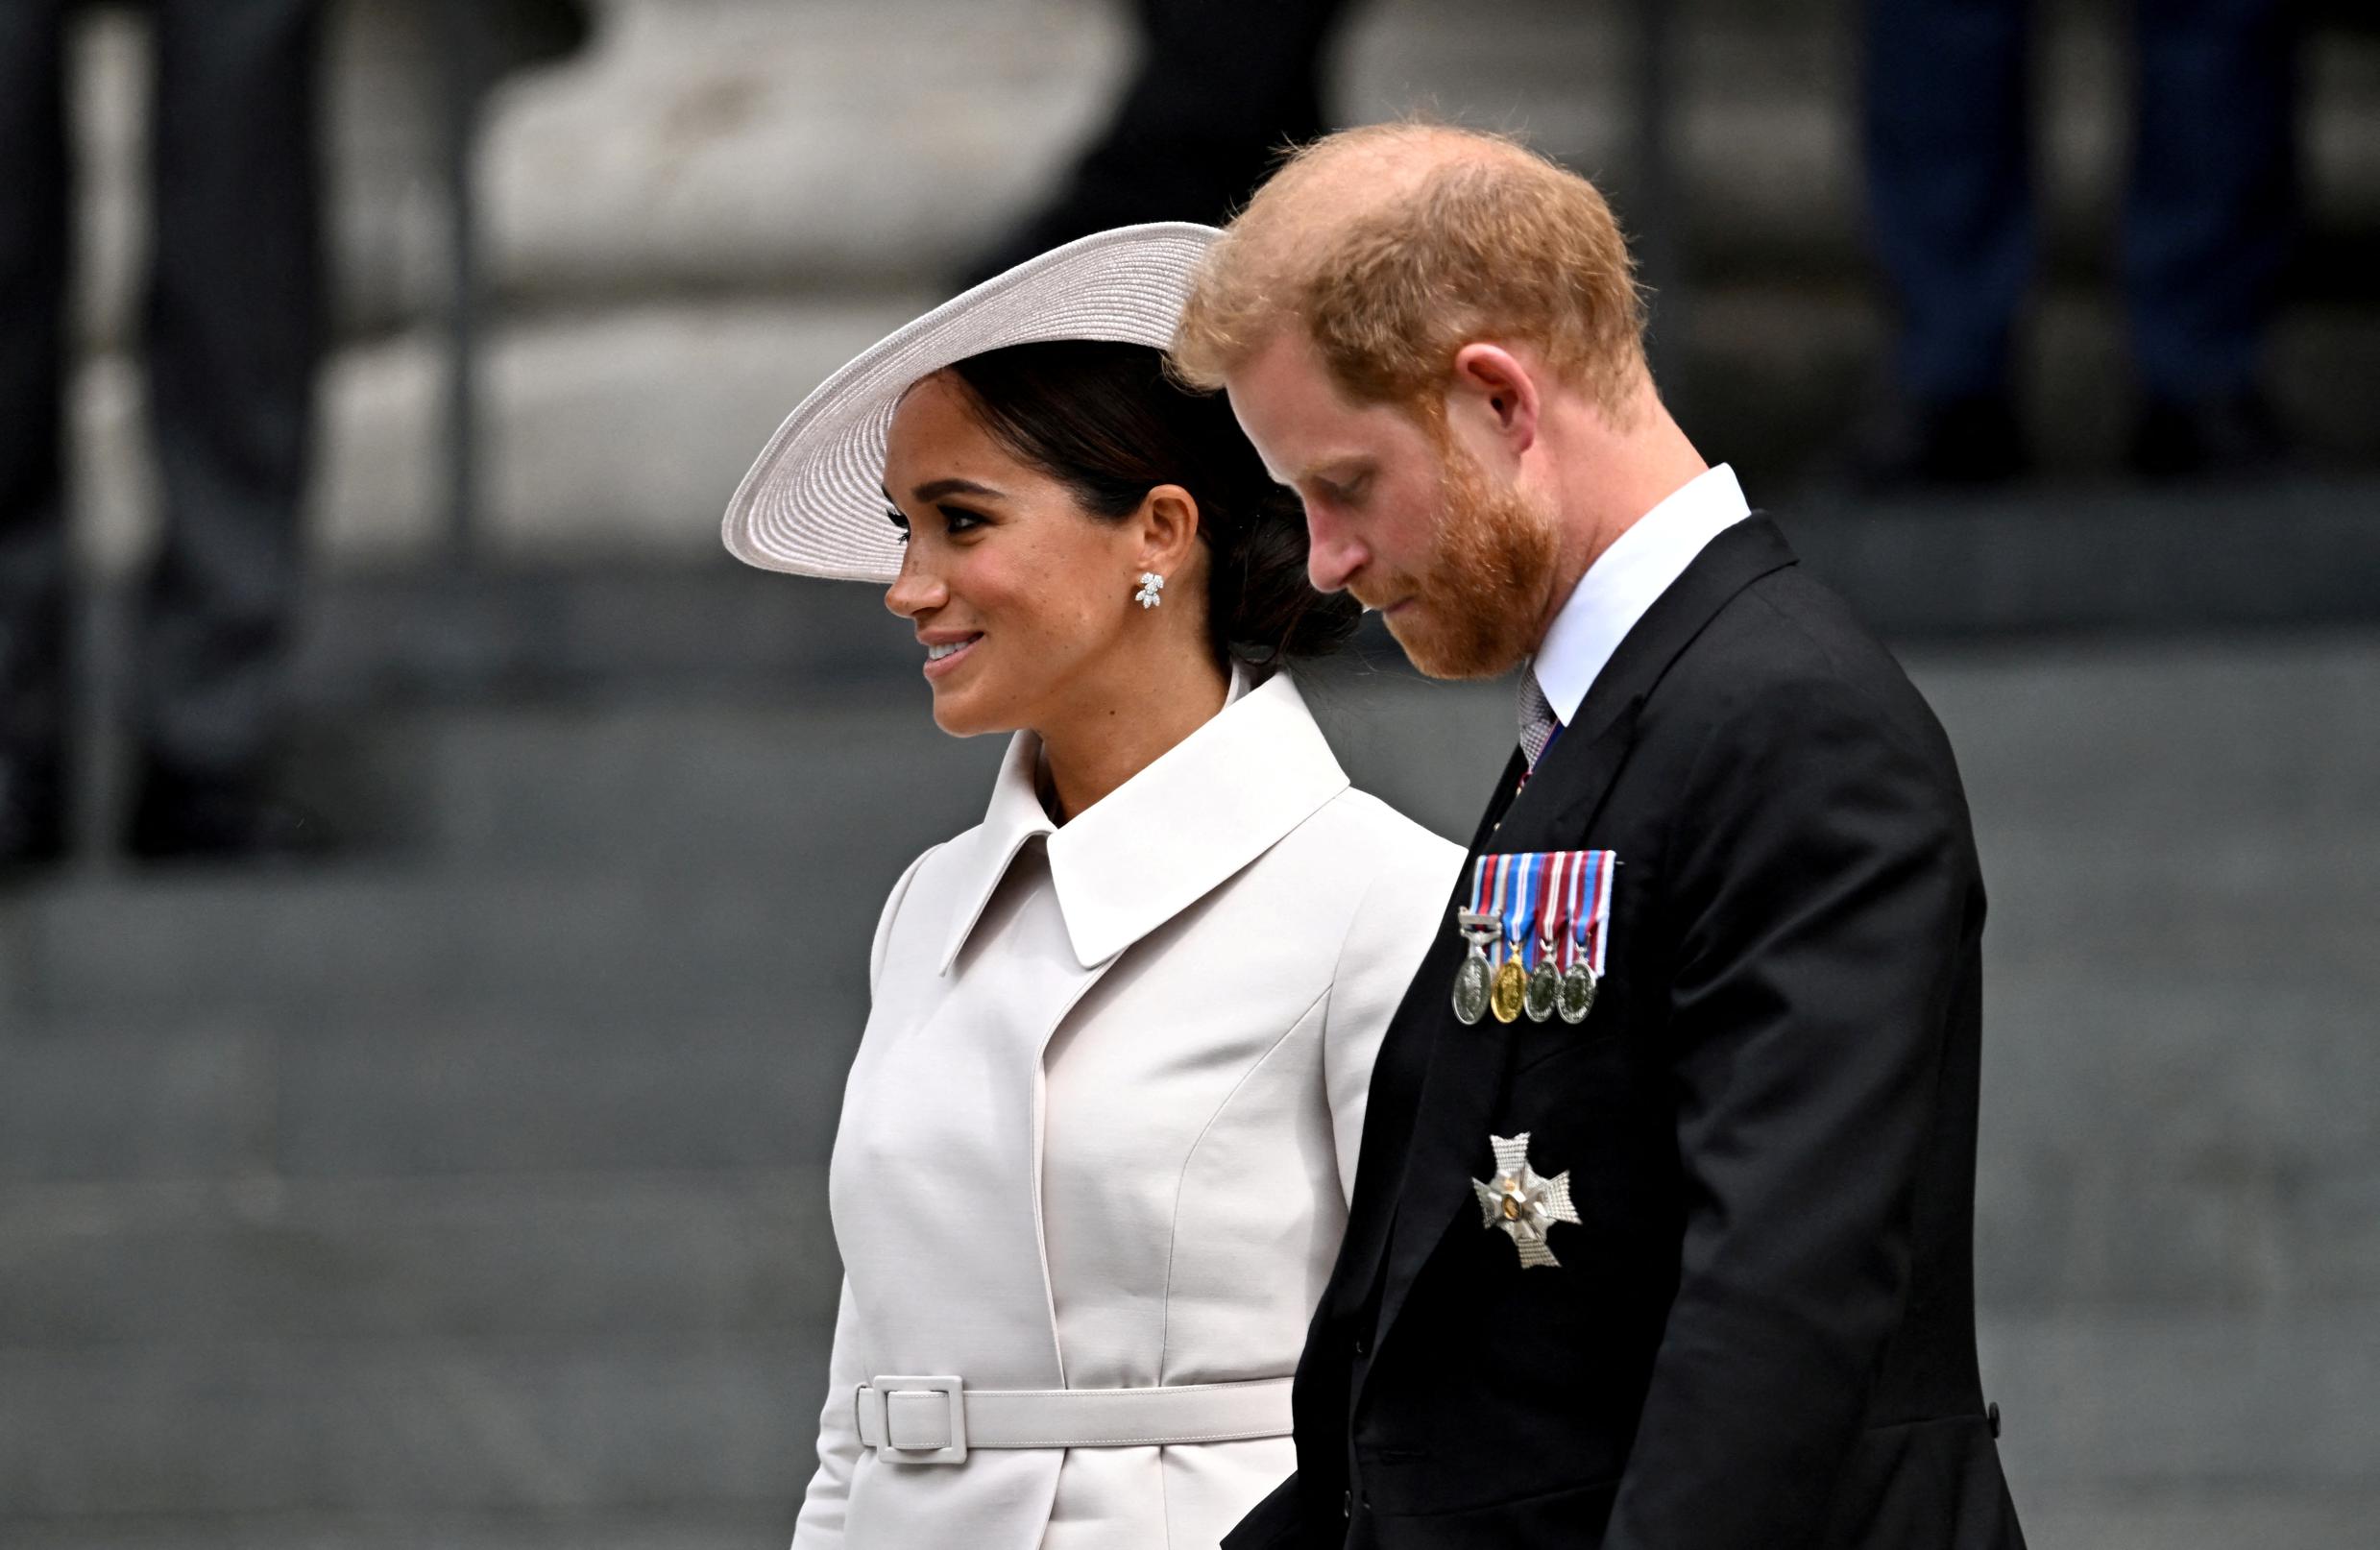 The Sun’s apologies aren’t enough for Harry and Meghan